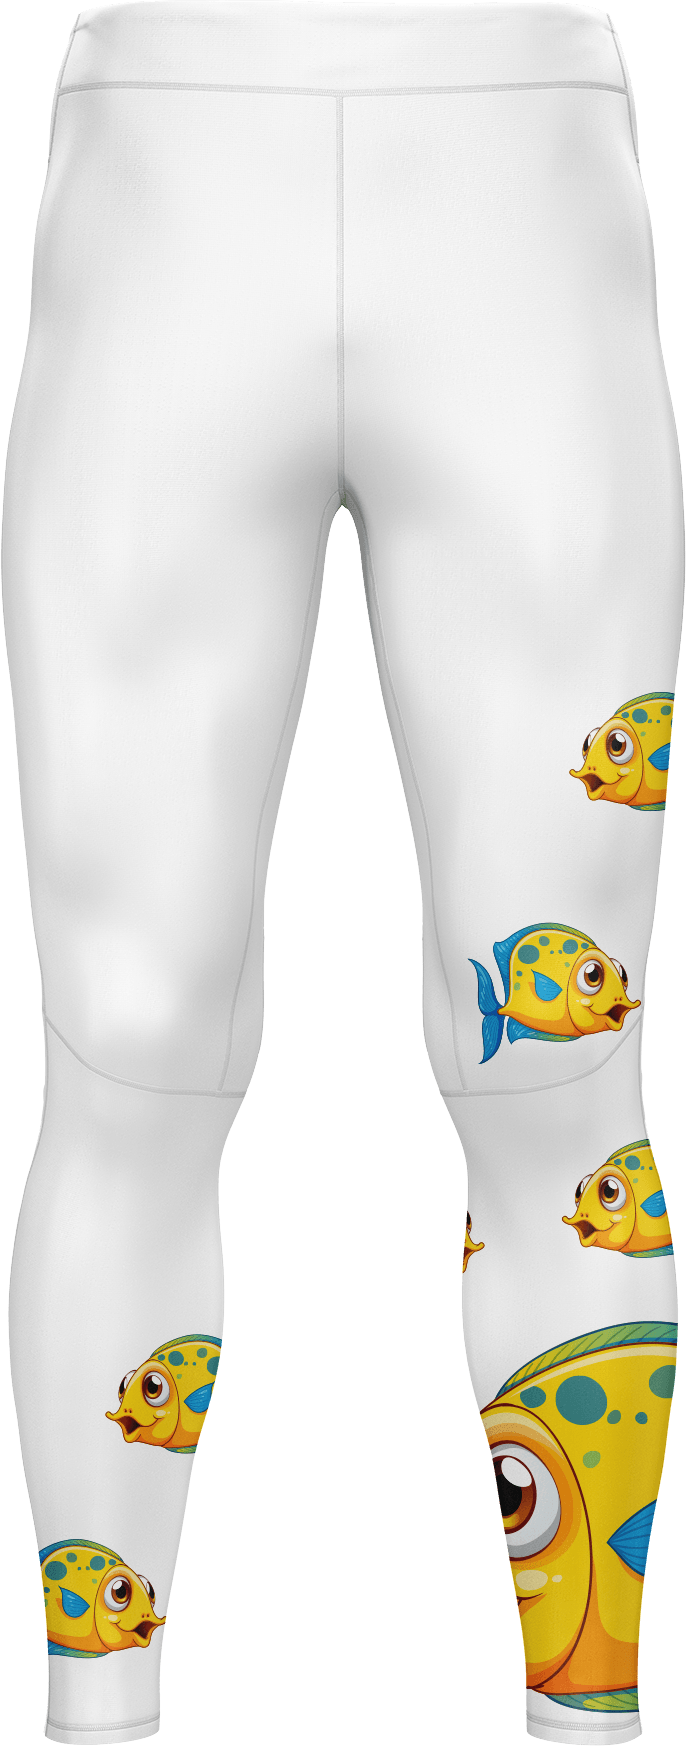 Fish Out Of Water tights 3/4 or full length - fungear.com.au